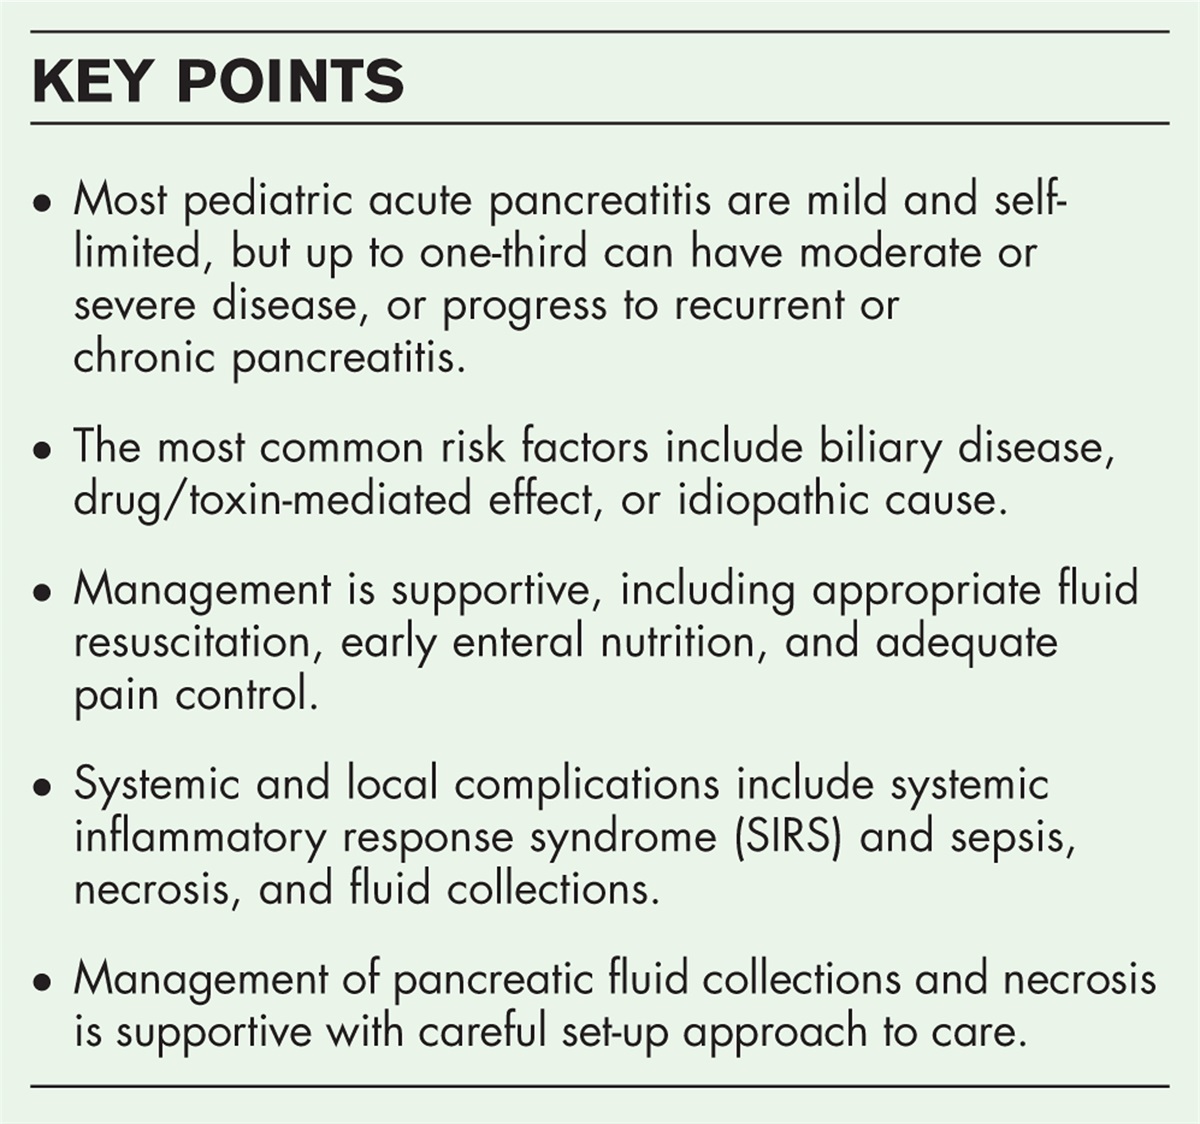 Acute pancreatitis in children: risk factors, management, and outcomes